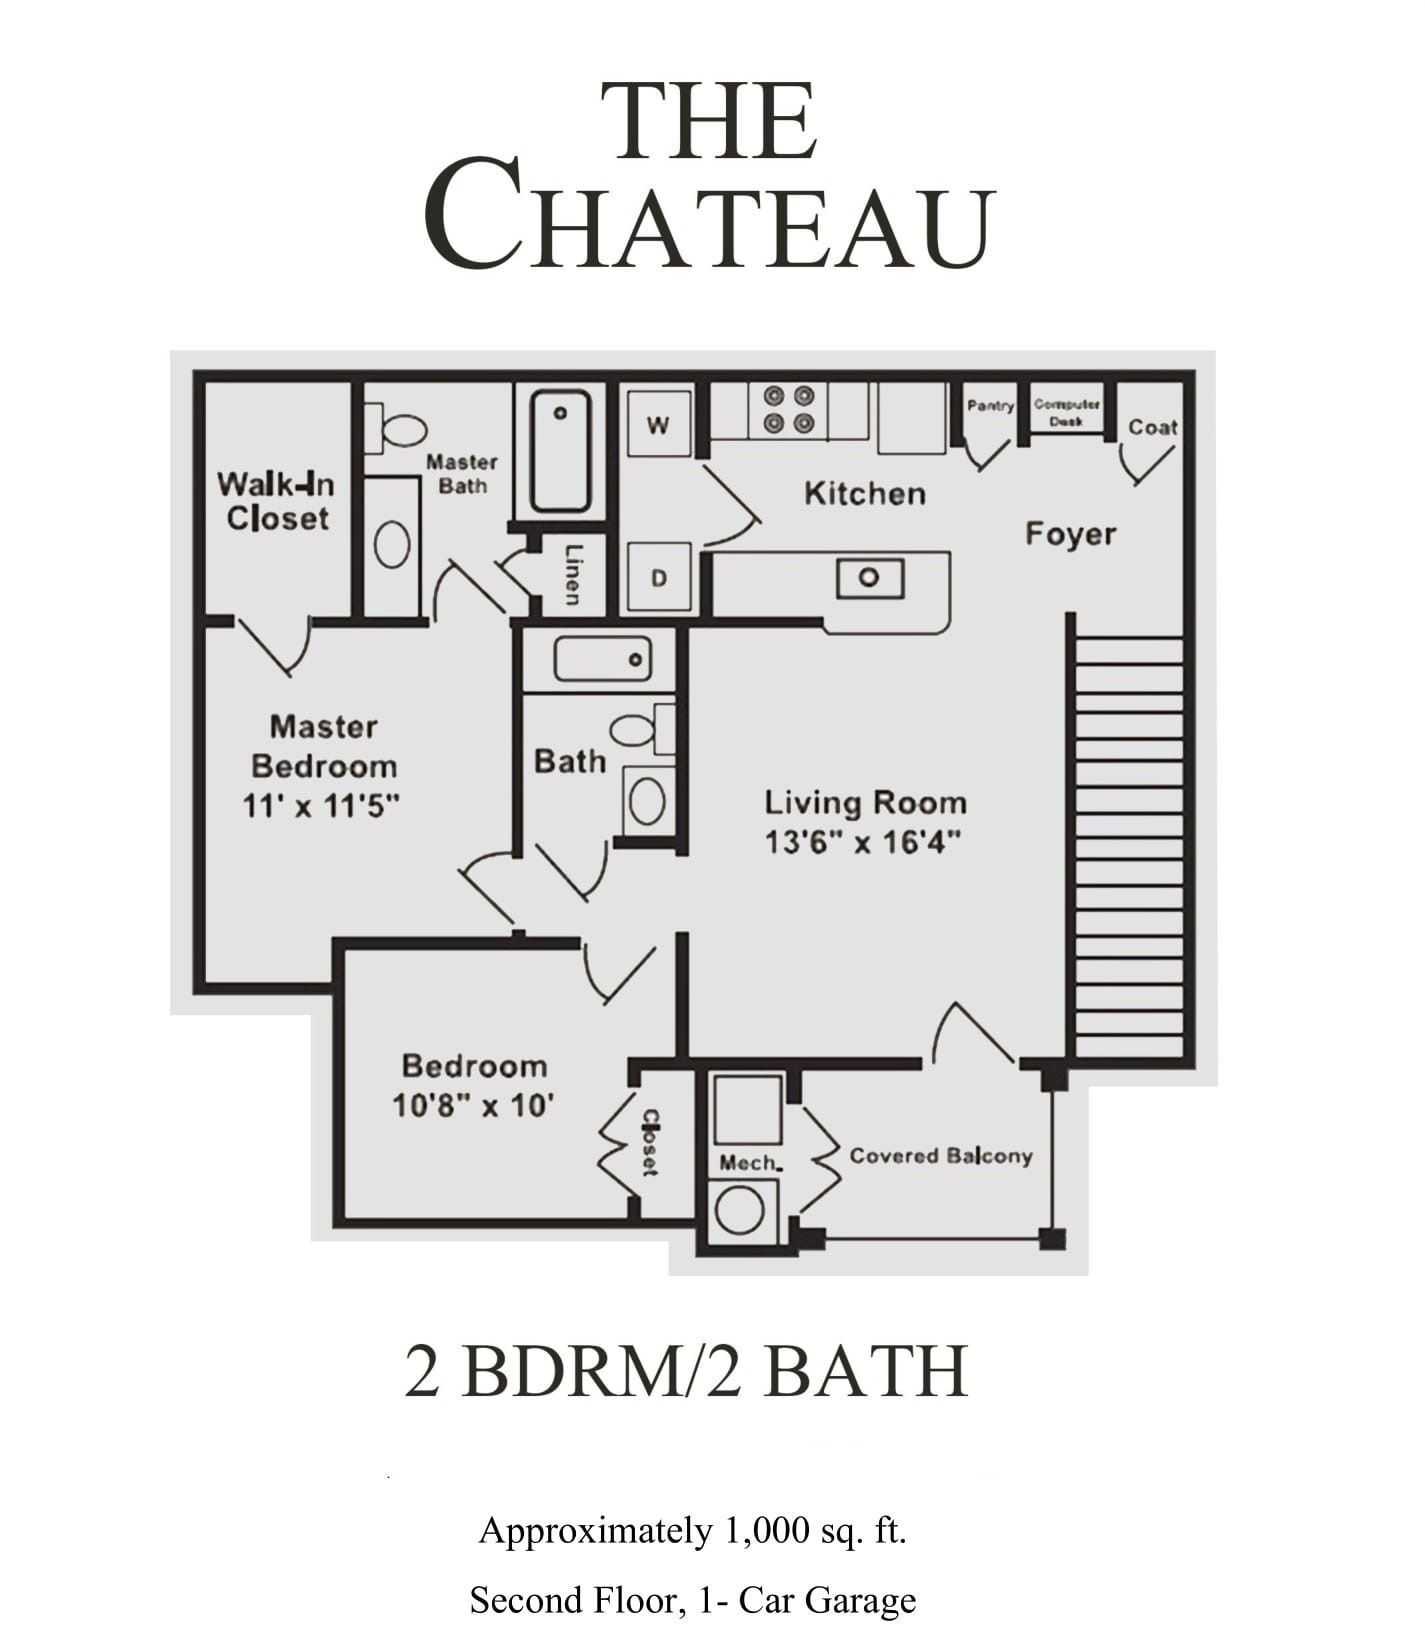 Chateau  floor plan drawing